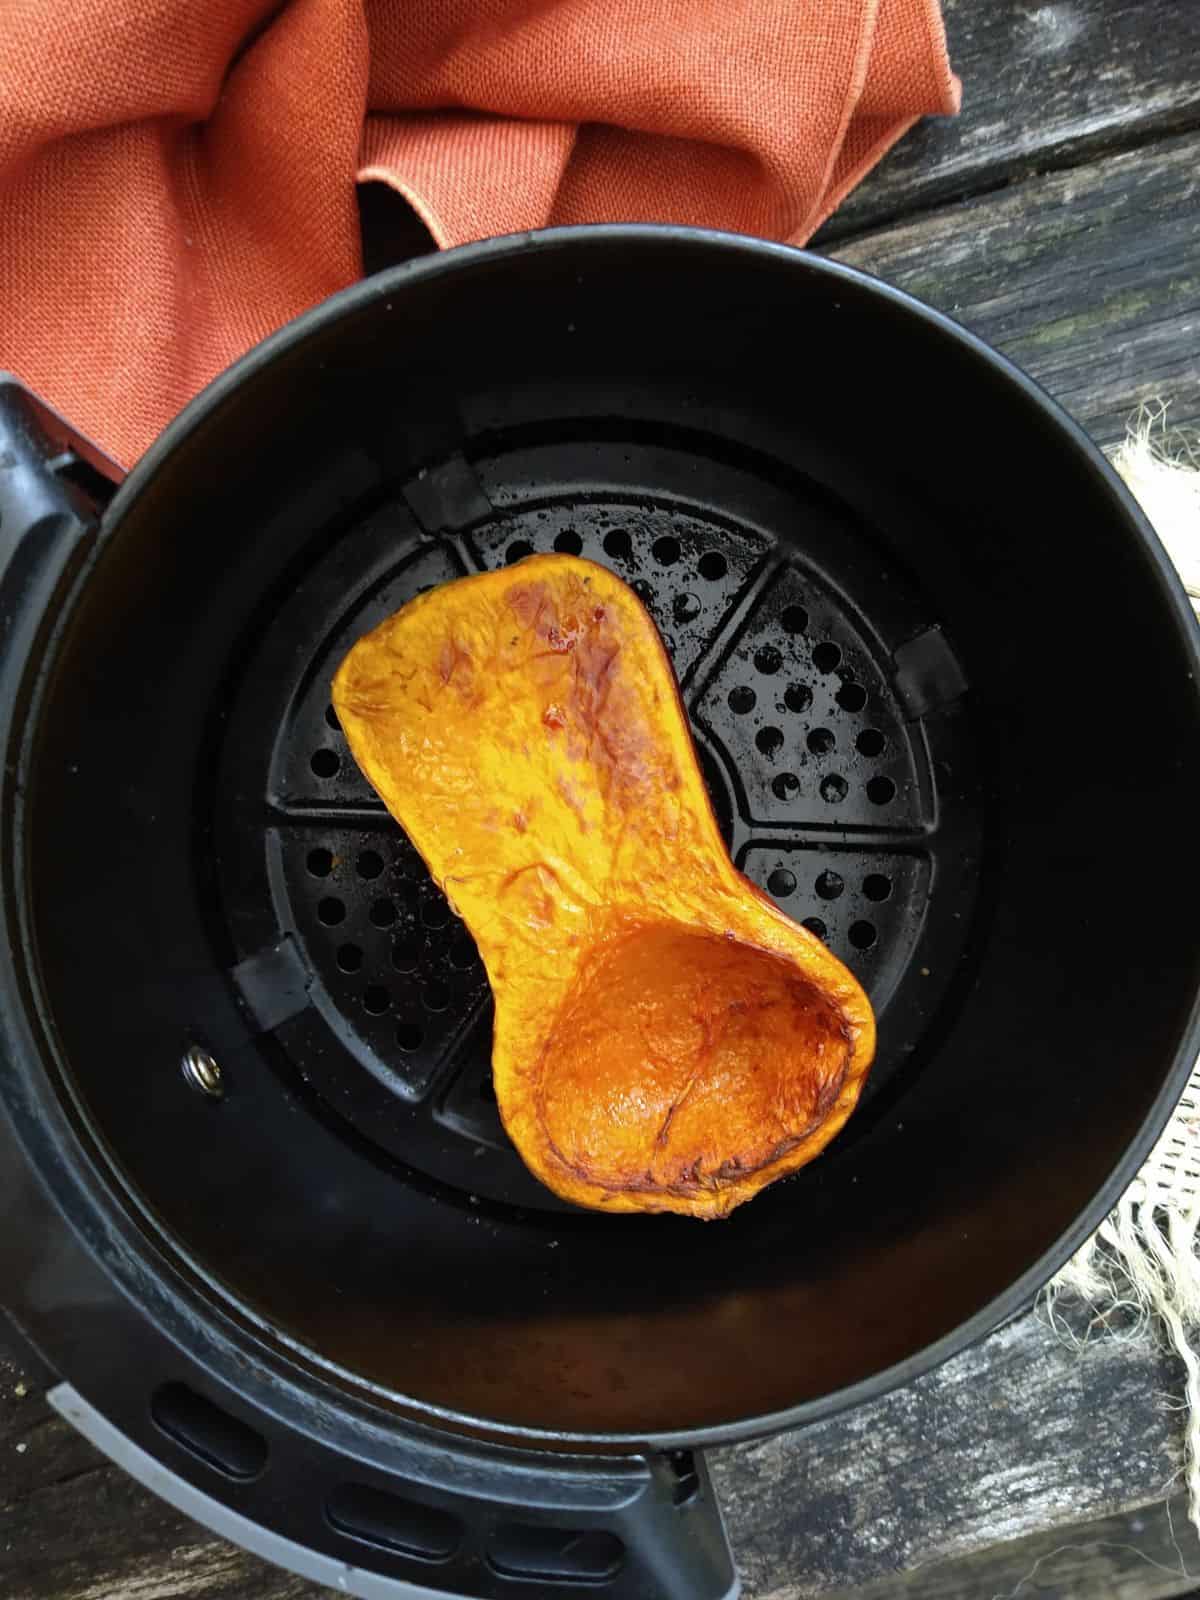 Honeynut squash in a black air fryer basket after it's been browned and cooked.